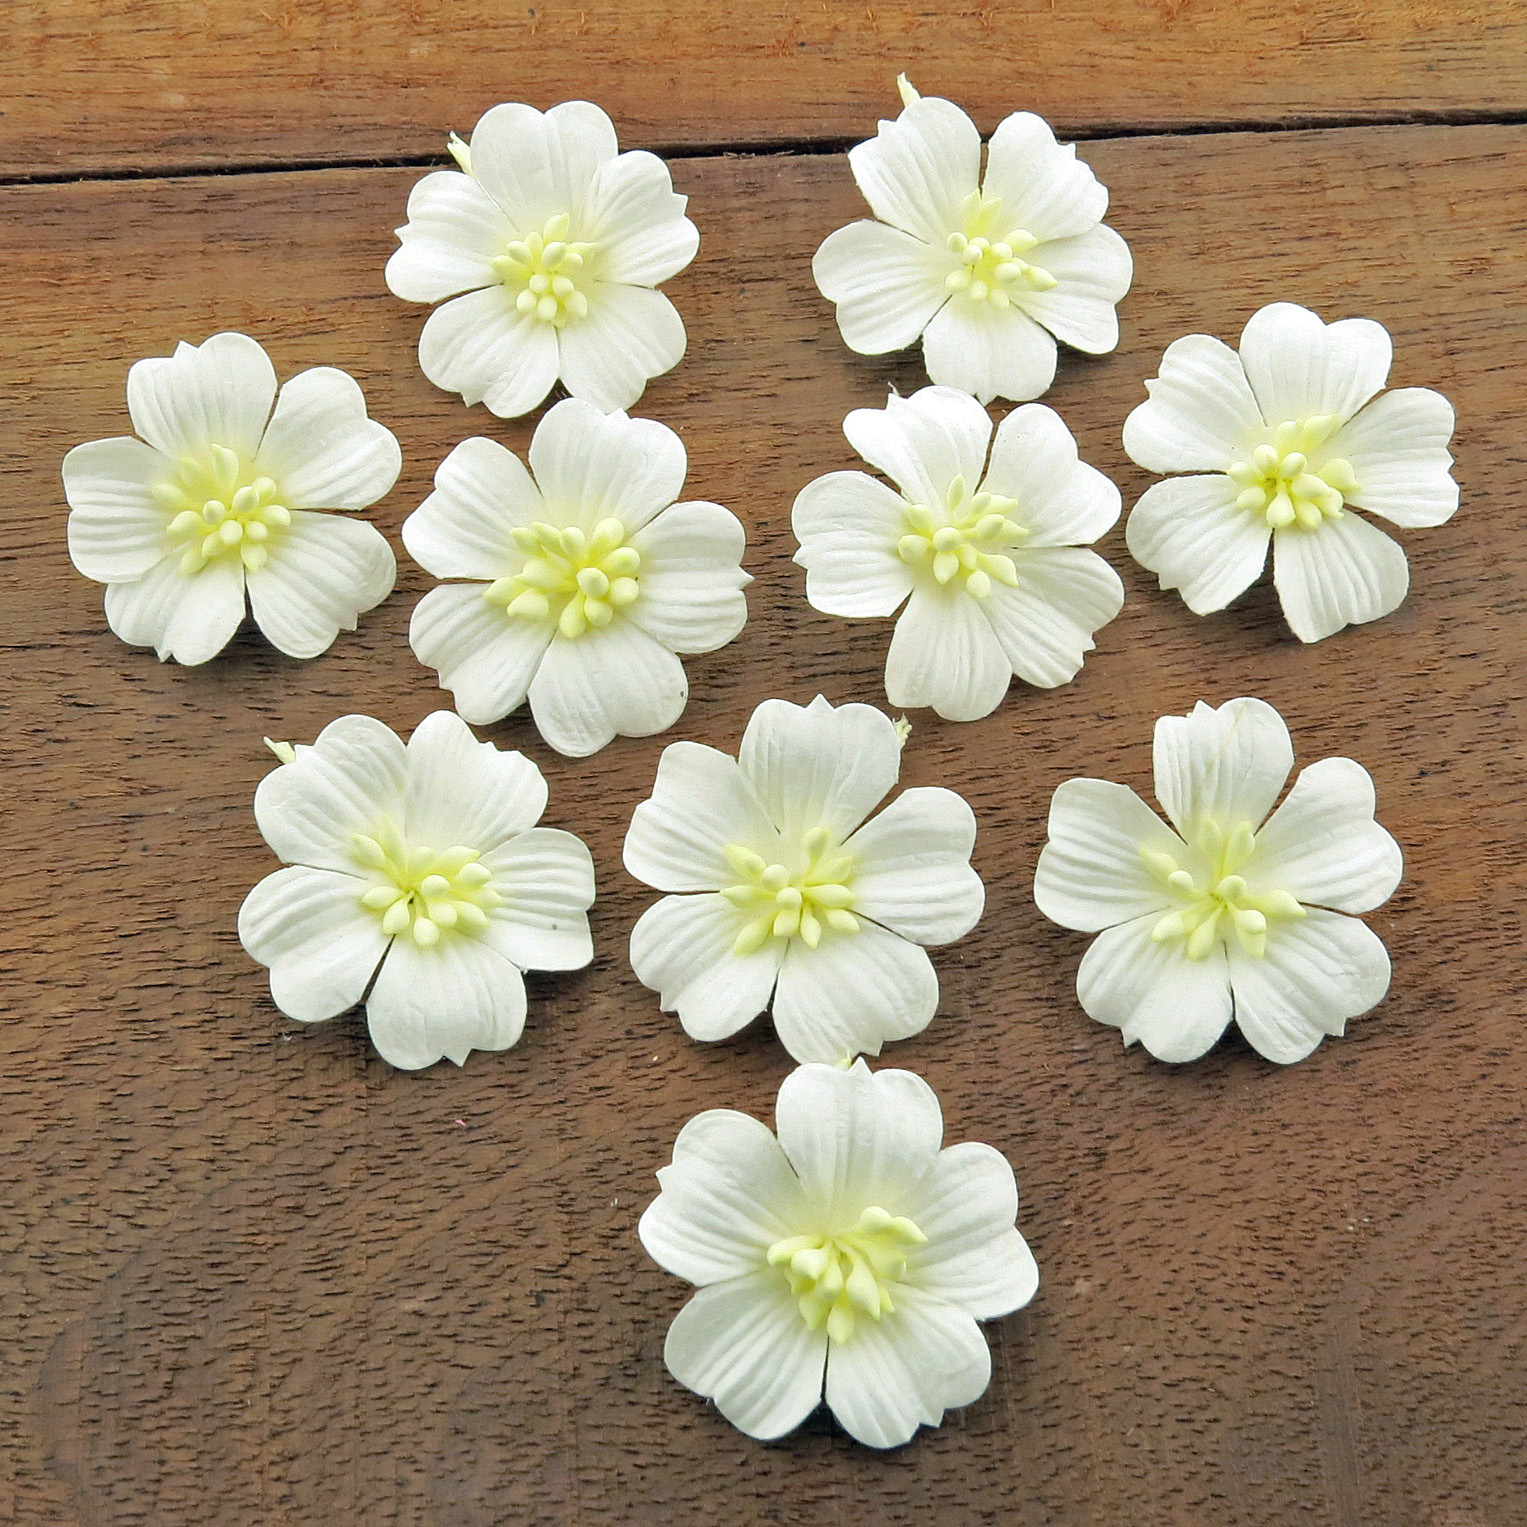 WHITE COTTON STEM MULBERRY PAPER FLOWERS - SET B - Click Image to Close